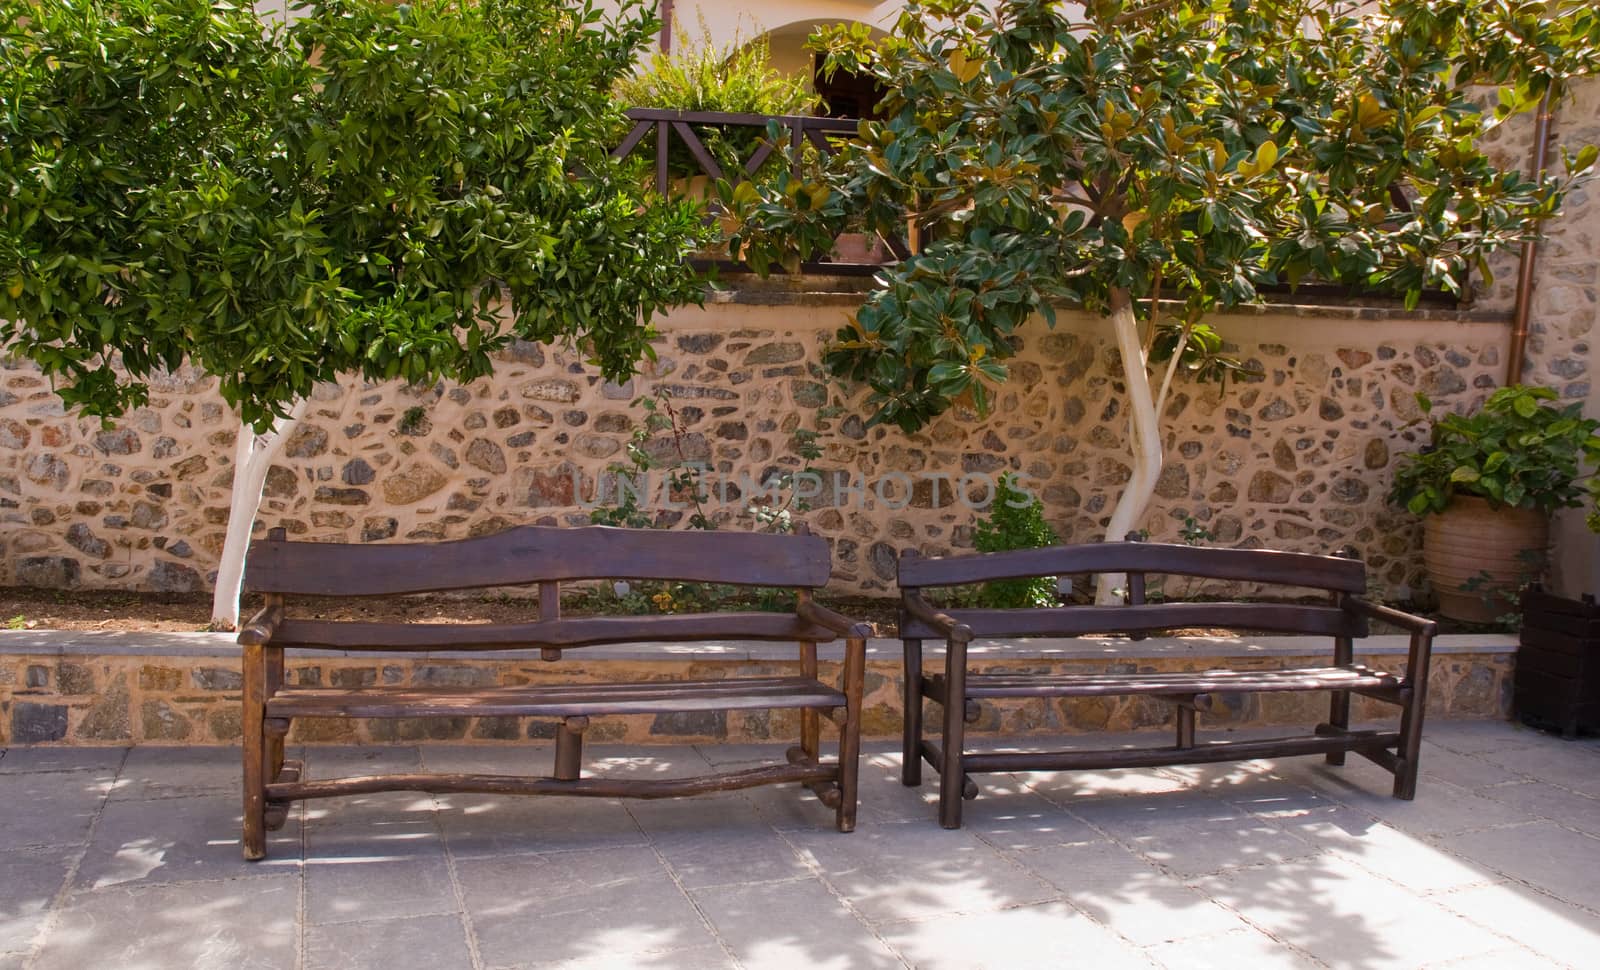 Church seating in ancient Greek monastery .